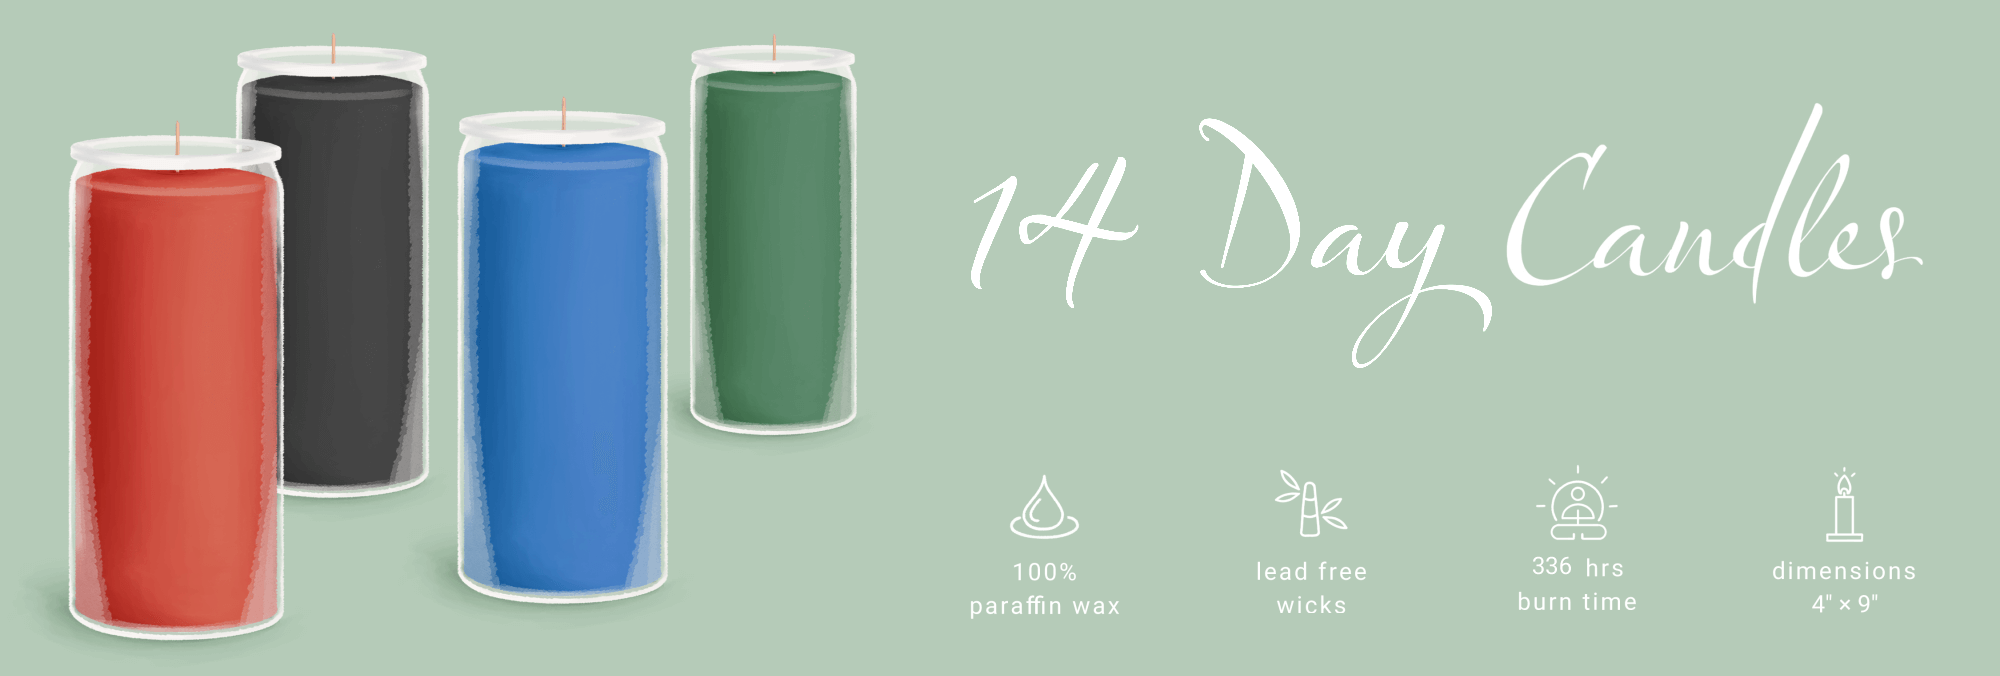 14 Day Candles